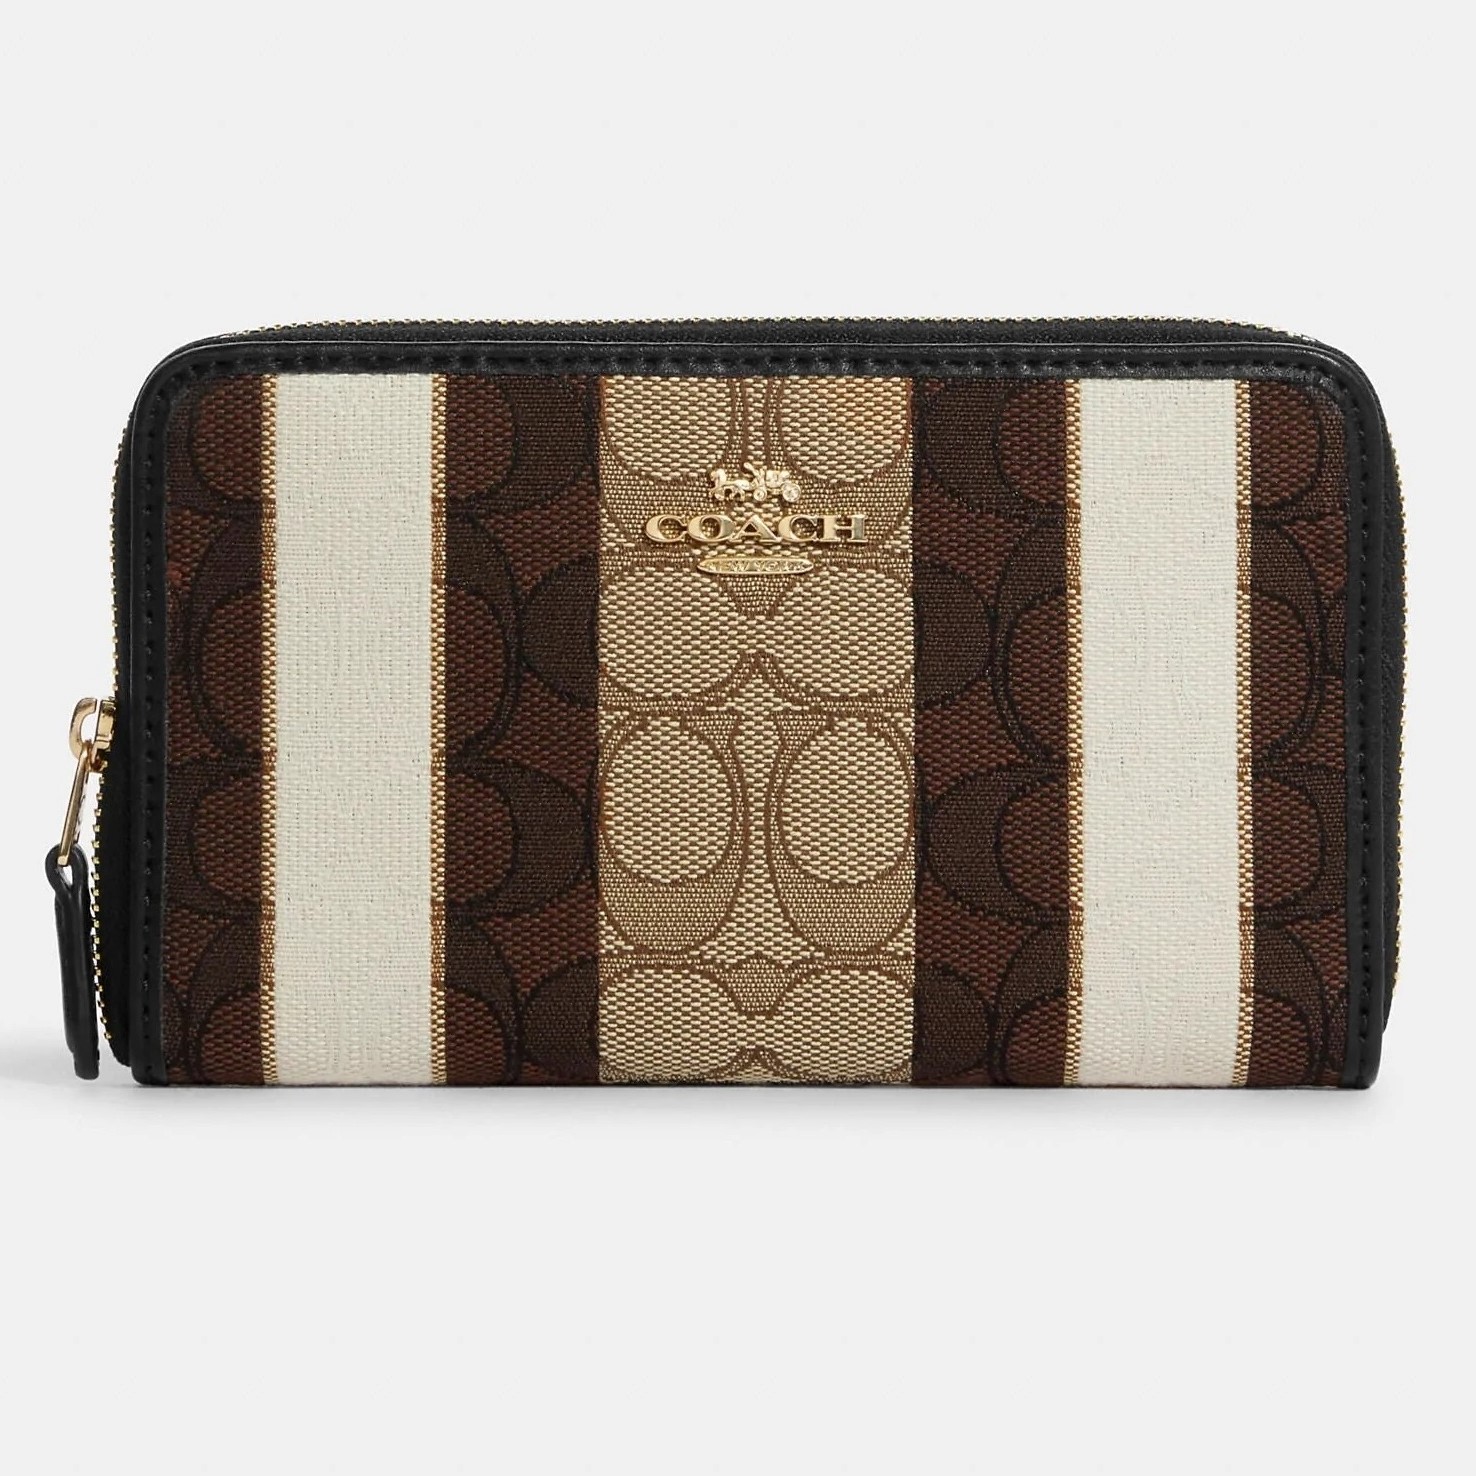 VÍ COACH NỮ MEDIUM ID ZIP WALLET IN SIGNATURE JACQUARD WITH STRIPES 3